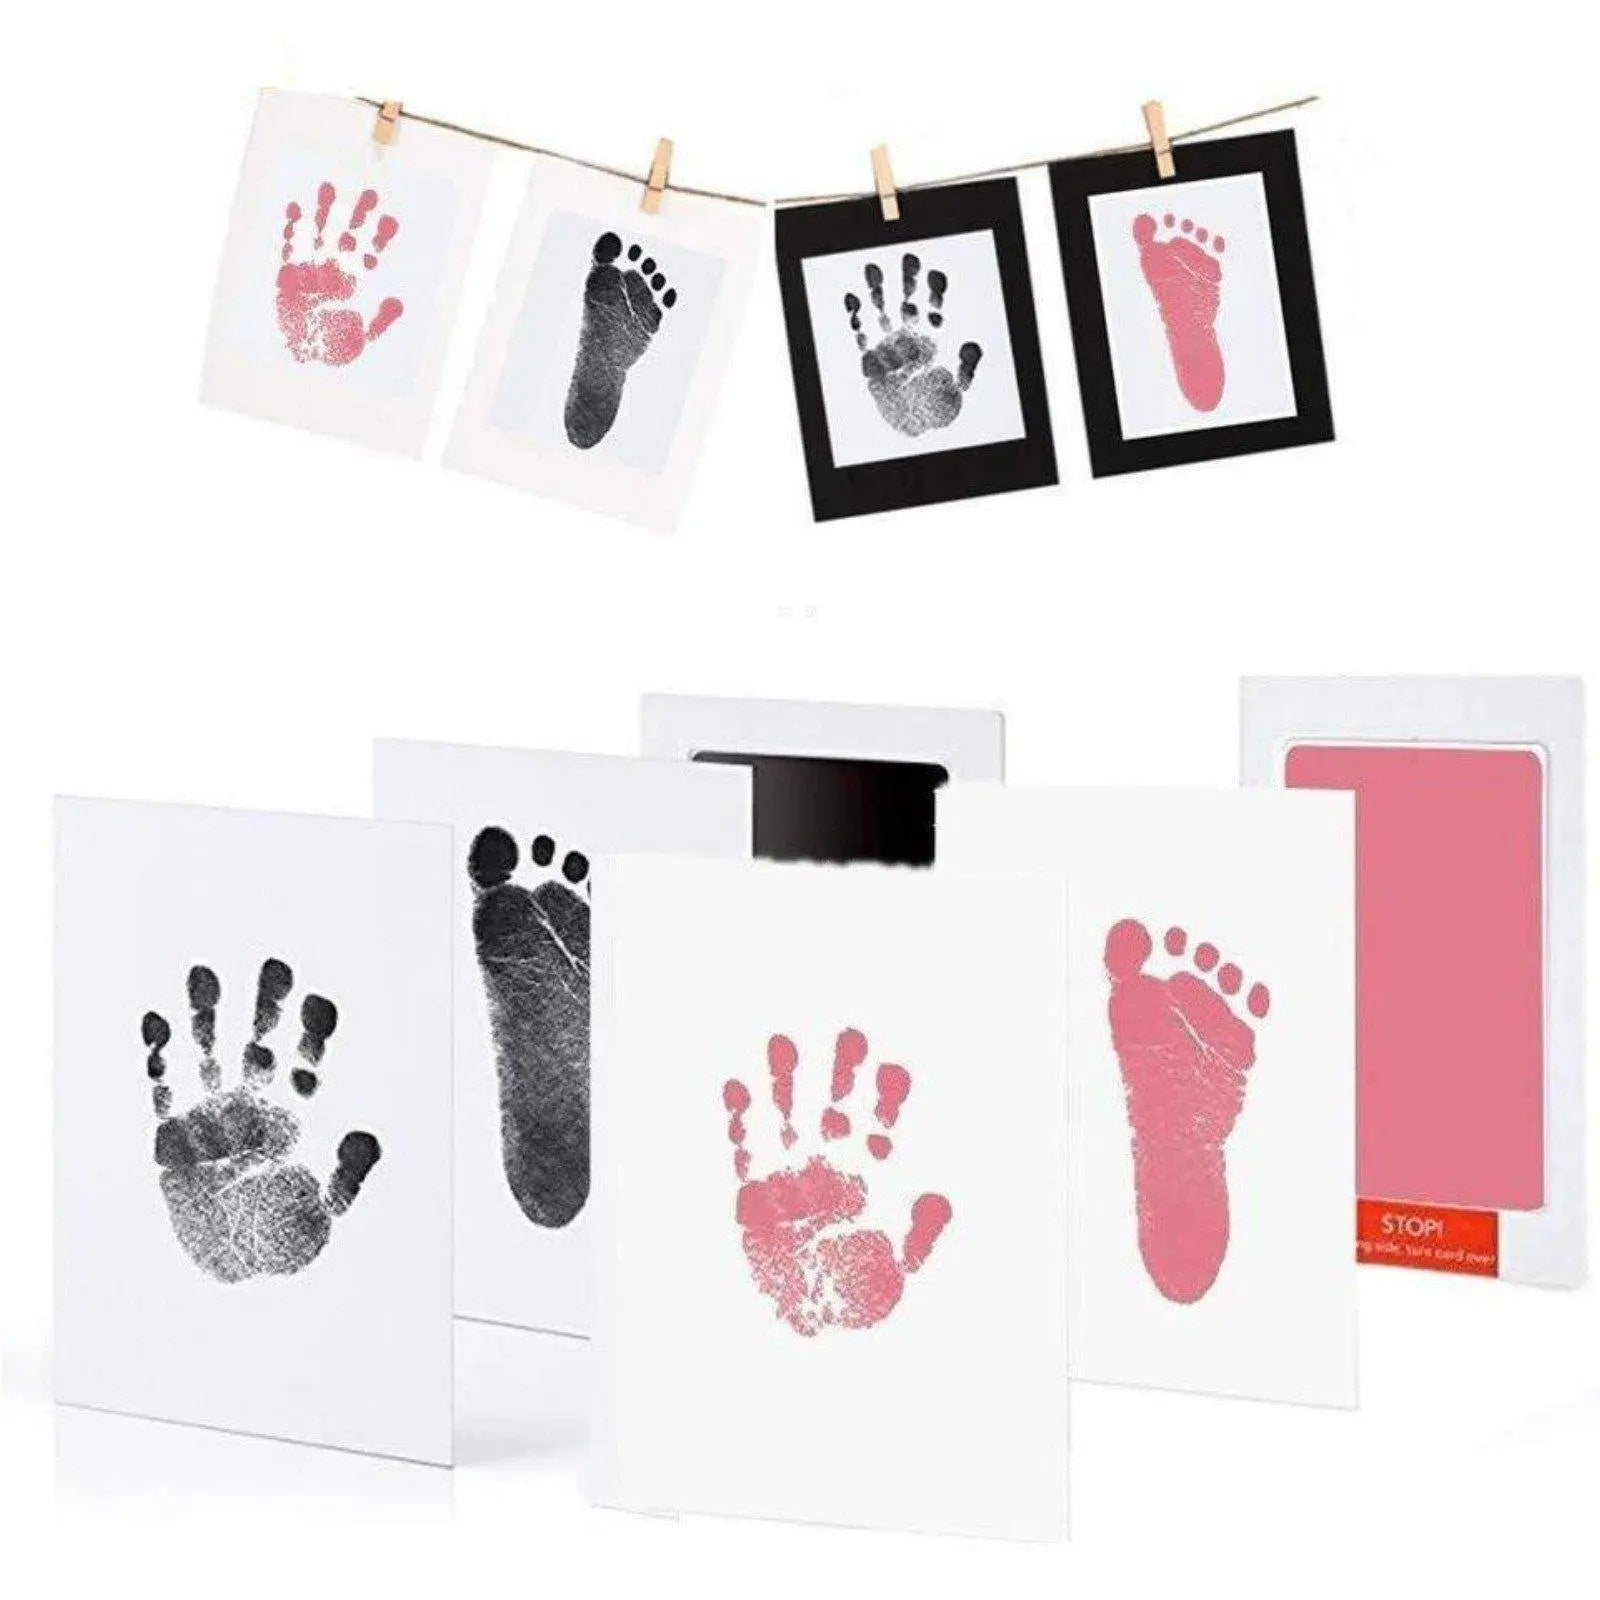 Baby Footprint Kit,Ink Pad for Baby Hand and Footprints - Dog Paw Print Kit,Clean Touch Baby Foot Printing Kit, Newborn Baby Handprint Kit with 8